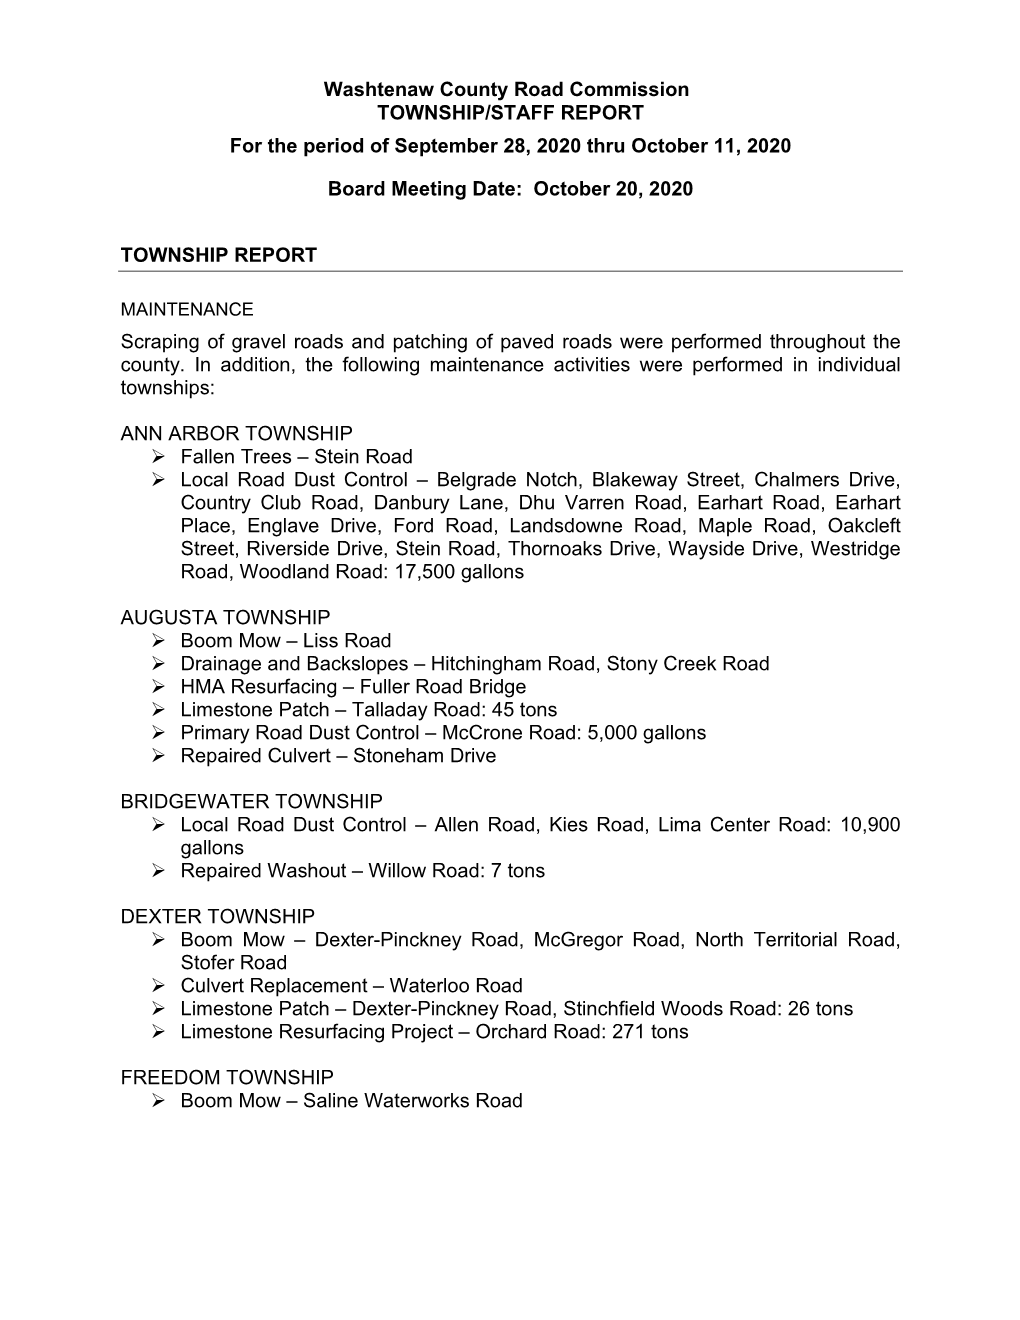 Washtenaw County Road Commission TOWNSHIP/STAFF REPORT for the Period of September 28, 2020 Thru October 11, 2020